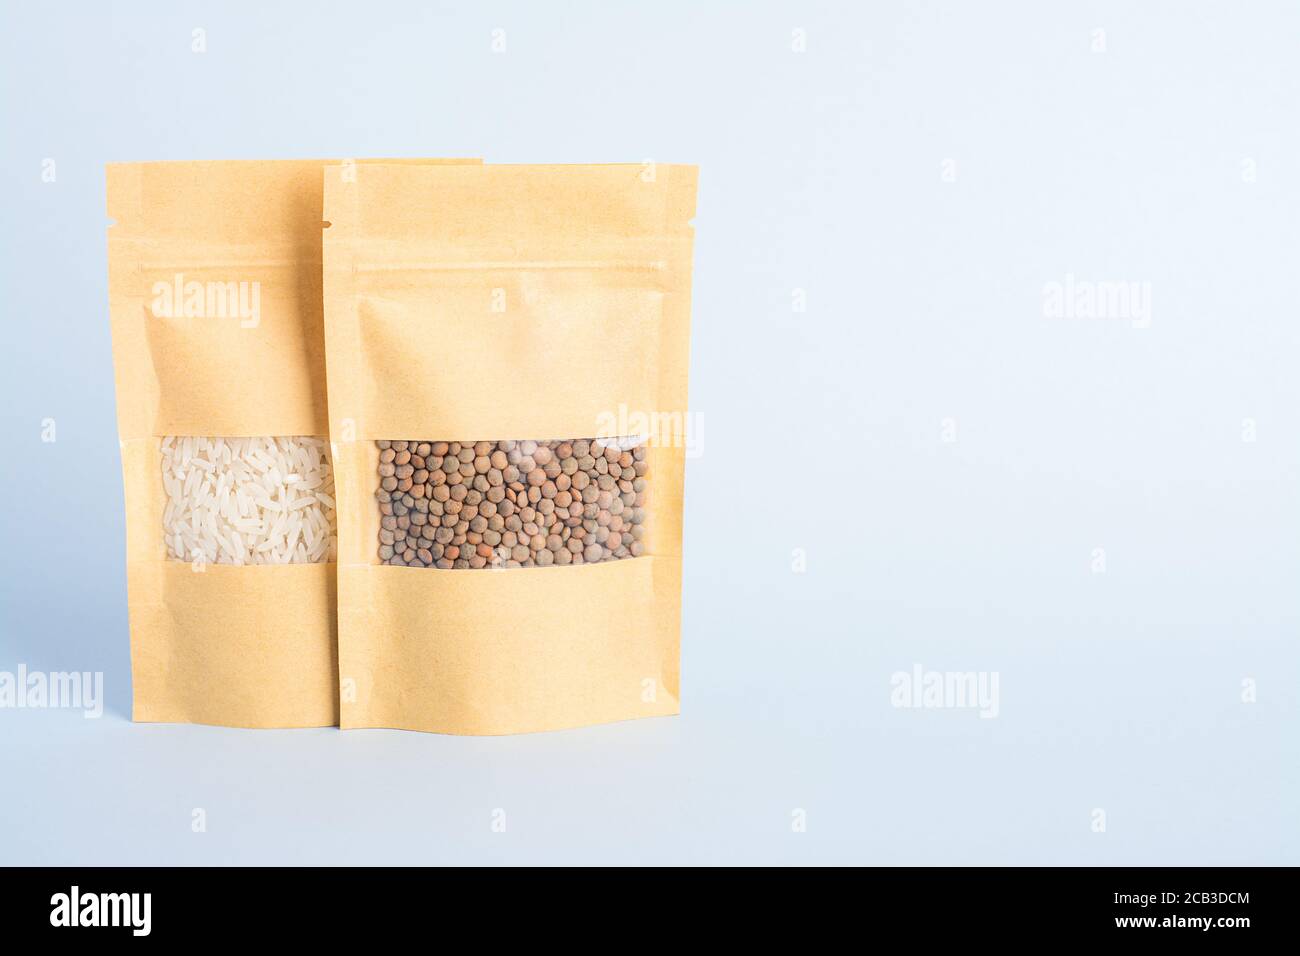 Two paper bags with rice and lentils Stock Photo